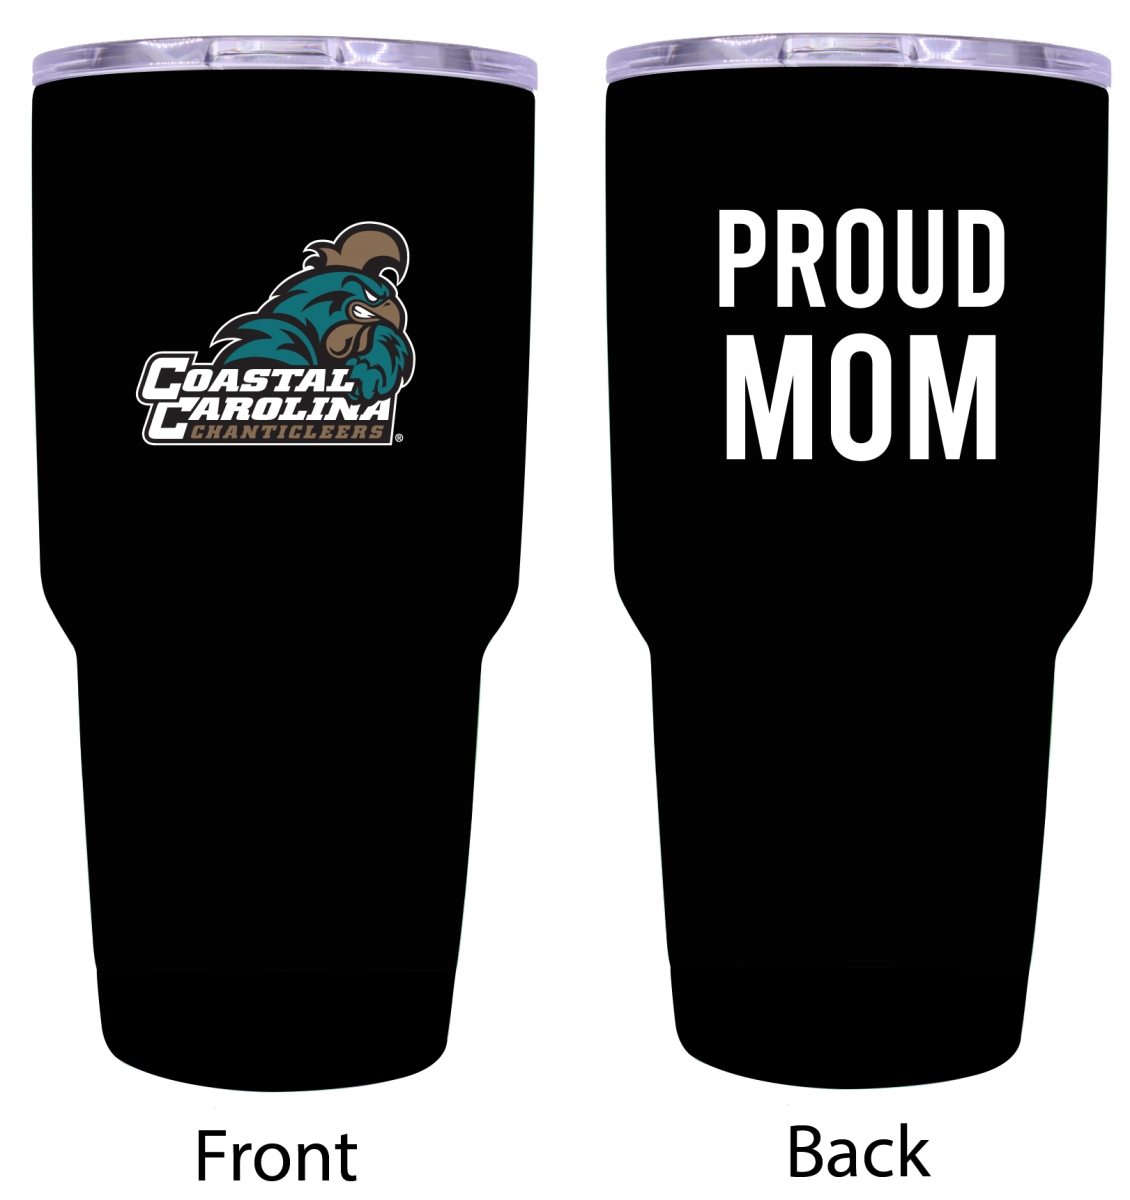 Picture of R & R Imports ITB-C-CCU20 MOM Coastal Carolina University Proud Mom 20 oz Insulated Stainless Steel Tumblers